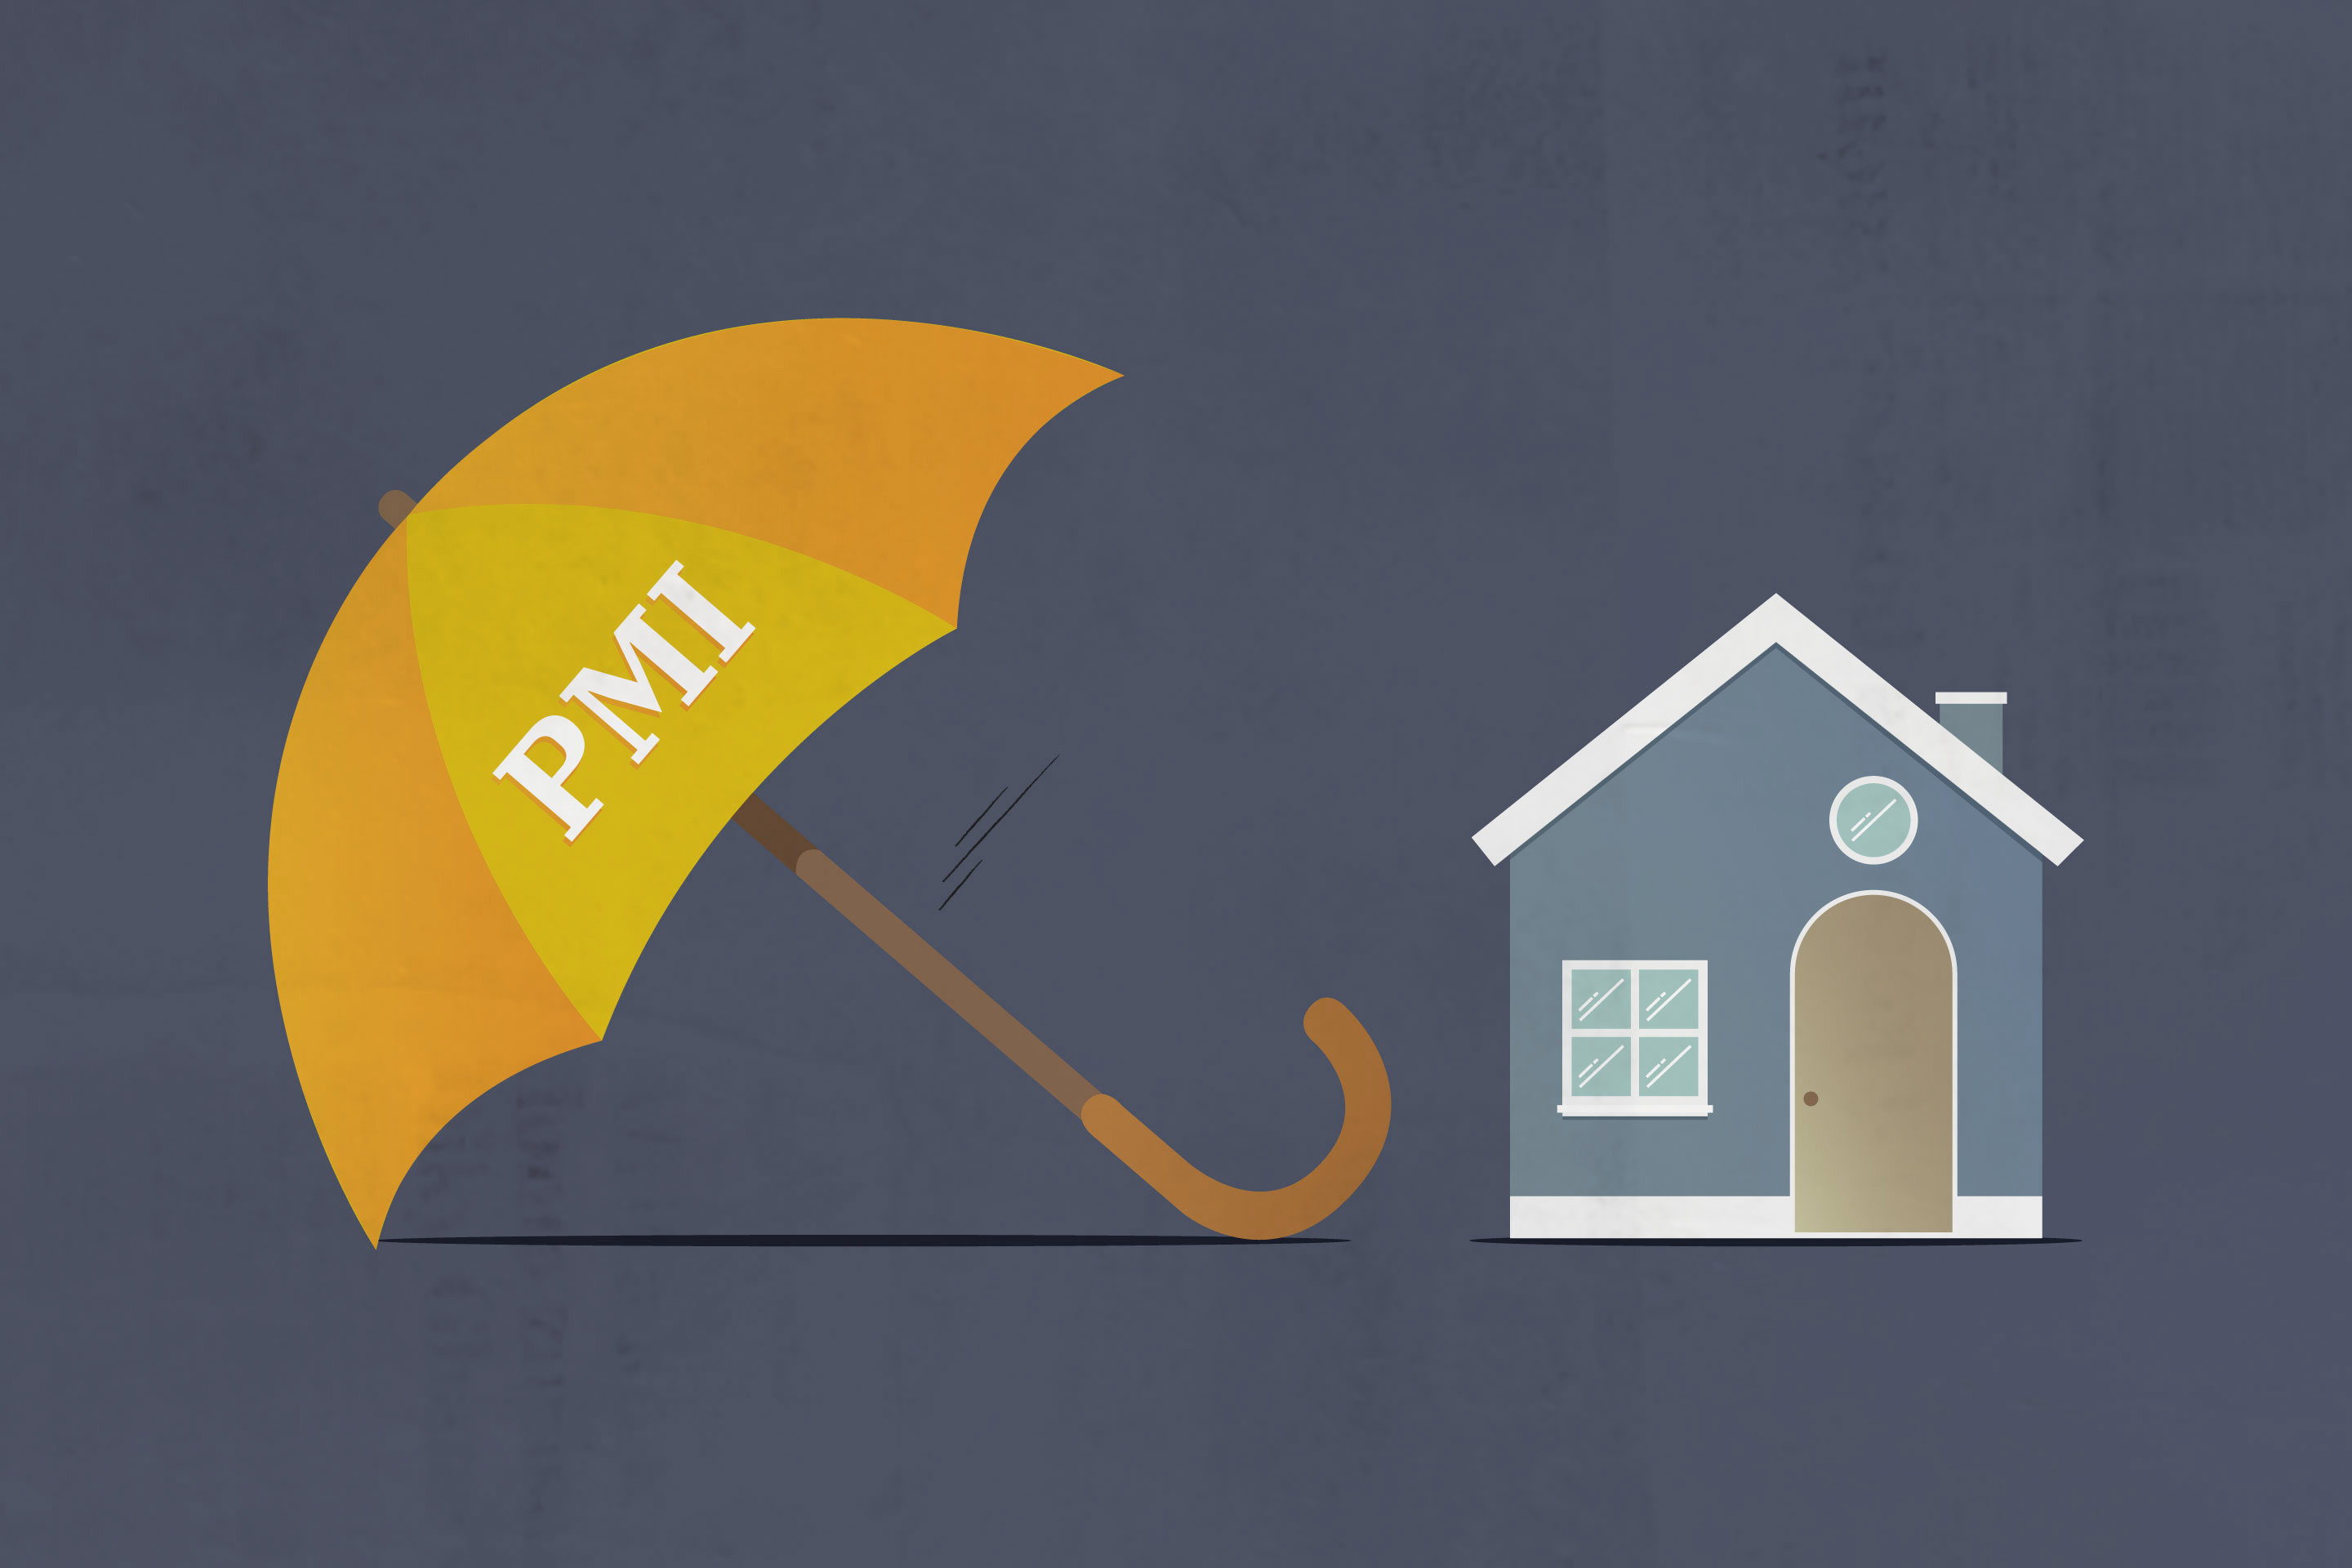 How to Get Rid of PMI